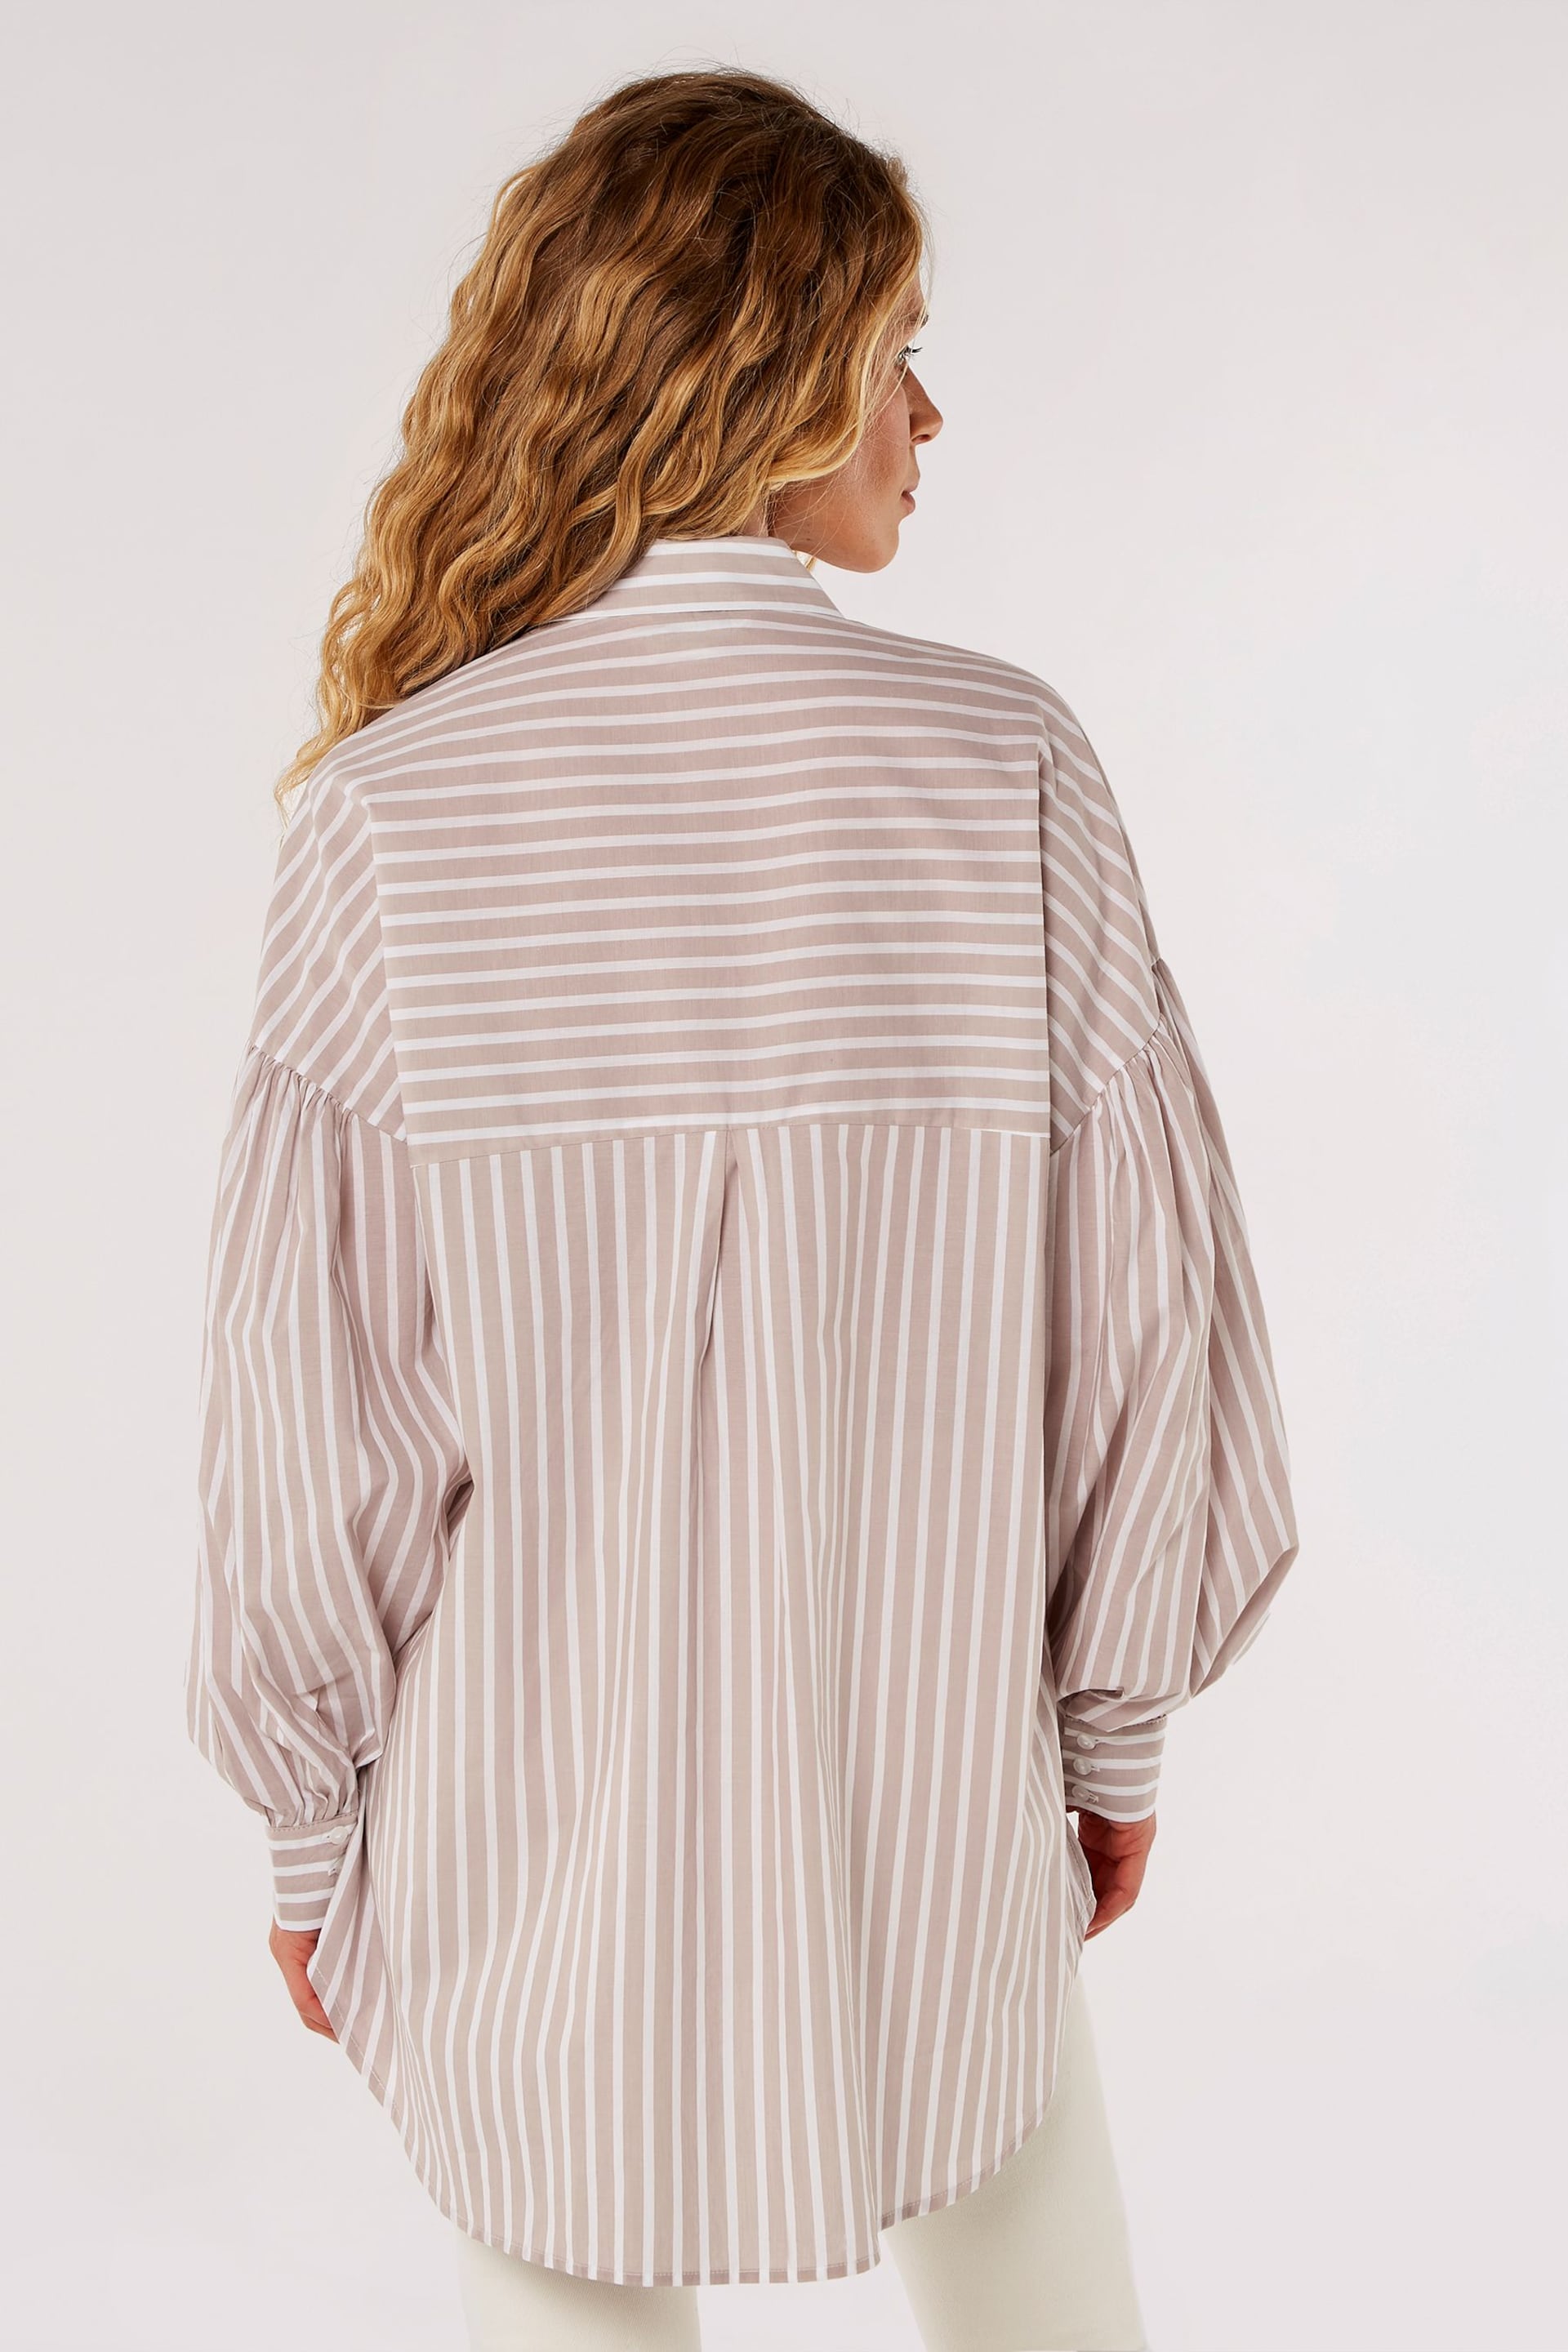 Apricot Brown Striped Long Balloon Sleeved Shirt - Image 2 of 4